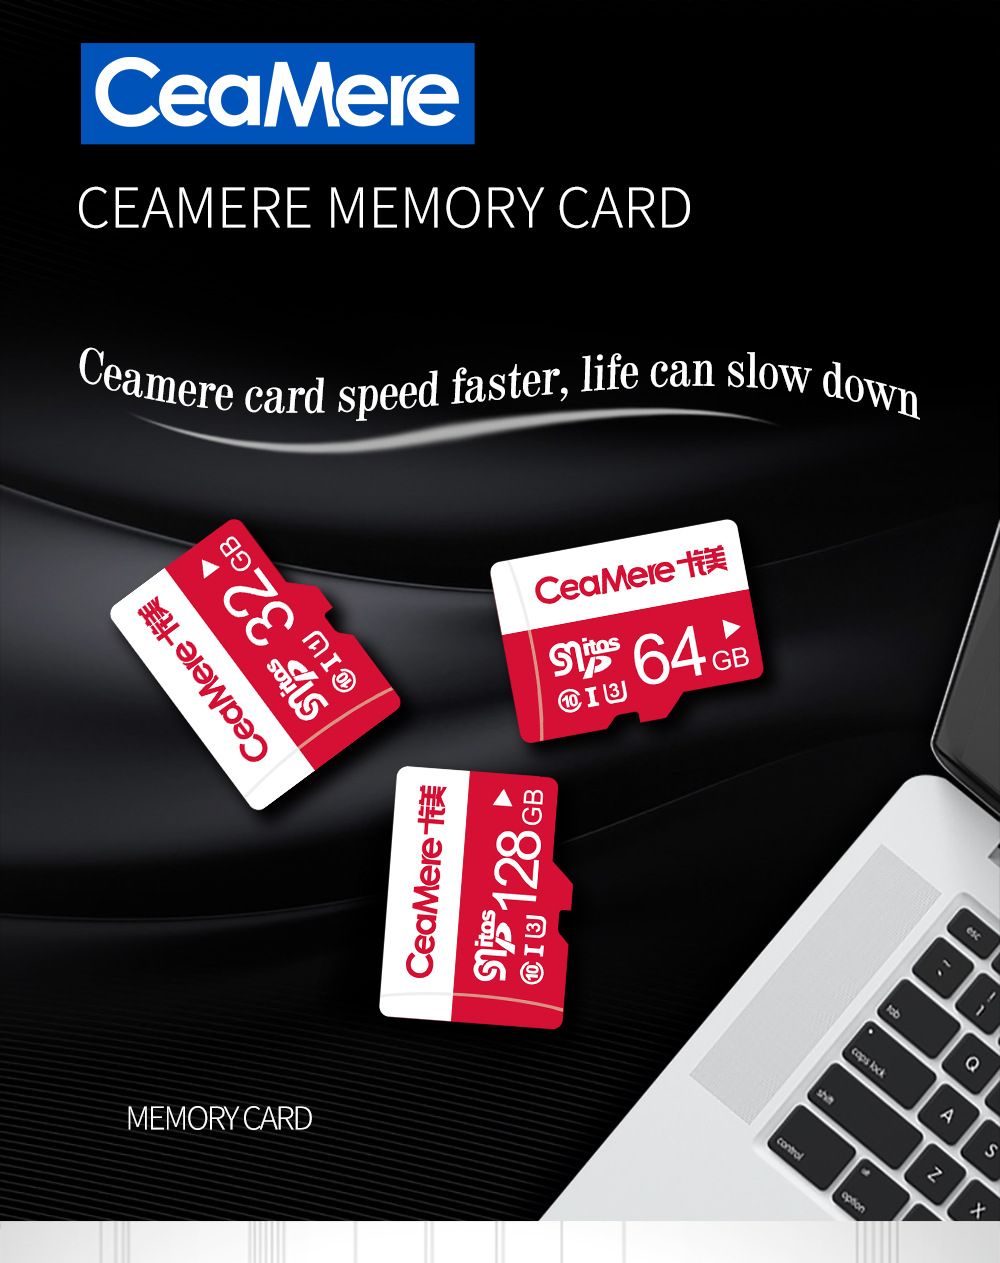 CEAMERE-SMITOSP-64G-U3-Waterproof-Professional-High-Speed-Memory-Card-For-Mobile-Phone-DVR-IP-Camera-1497380